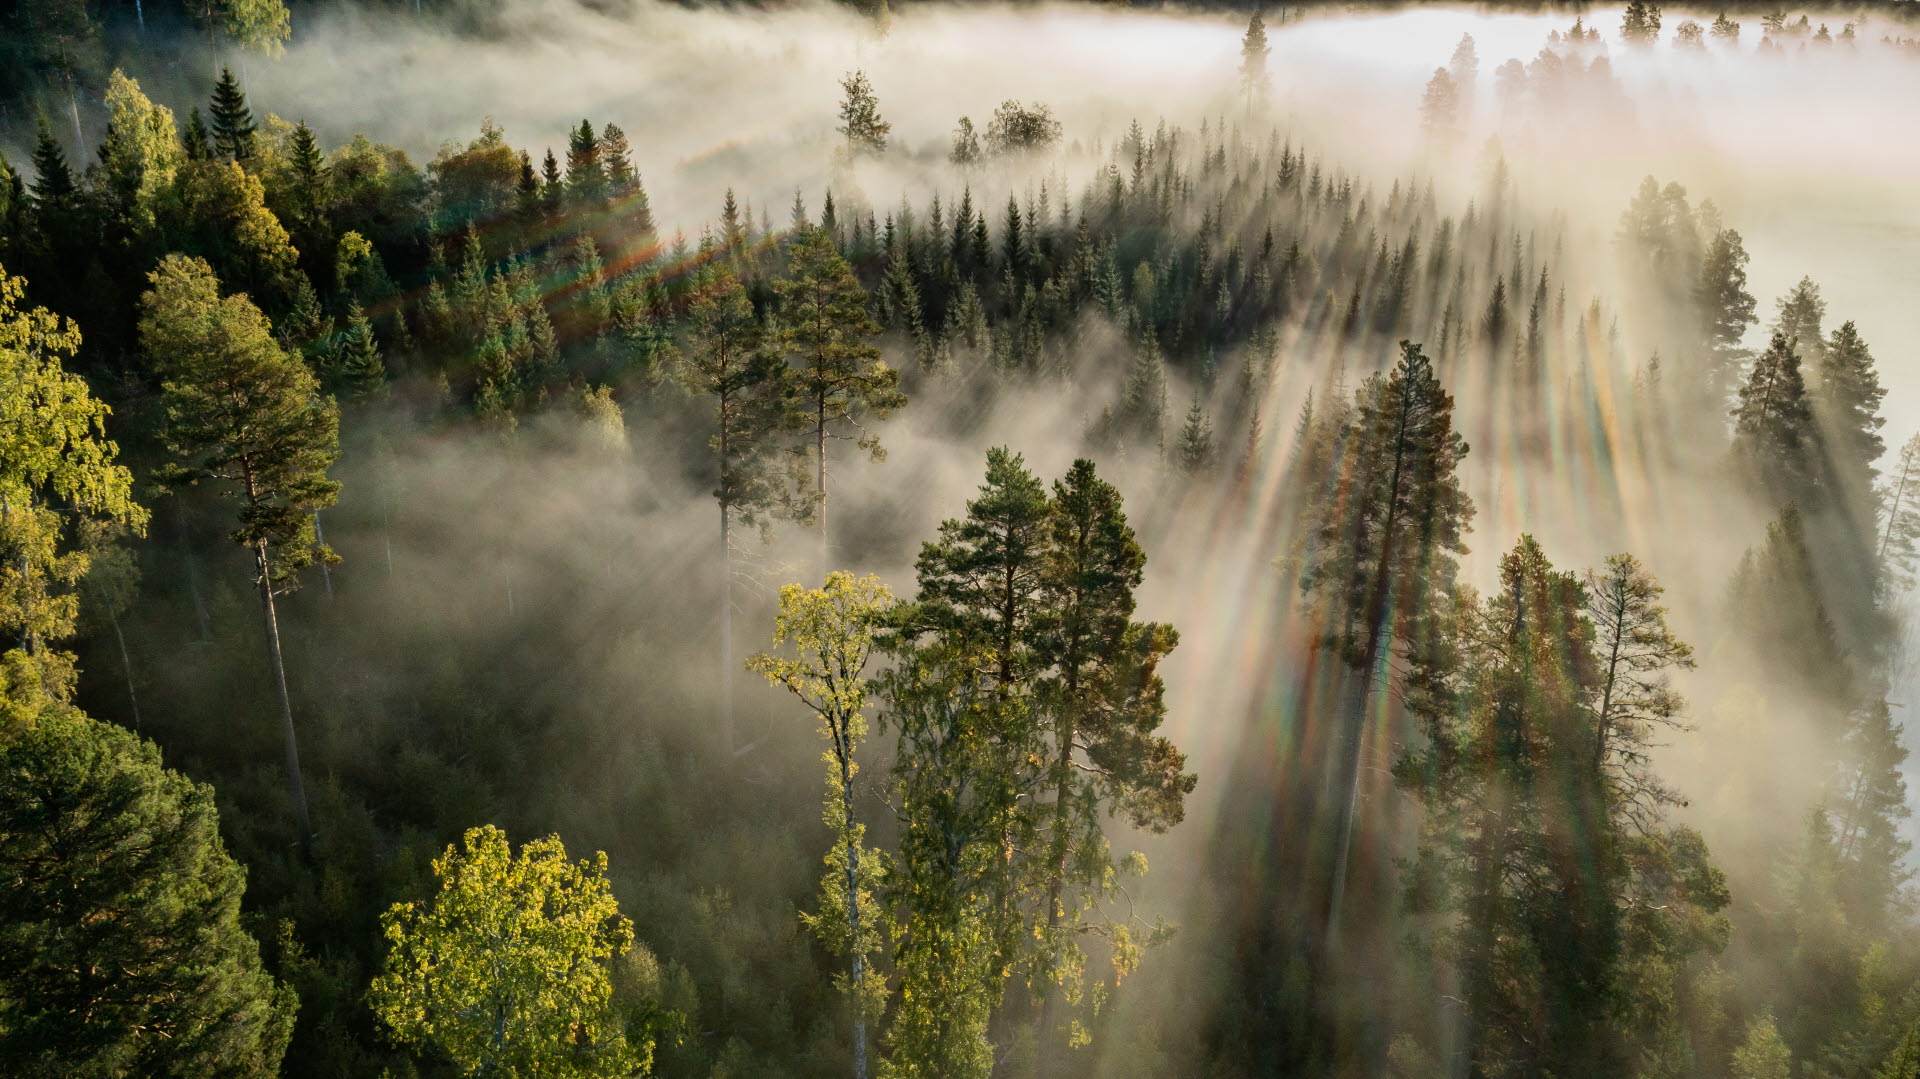 A drone image of a forest shrouded in mist.